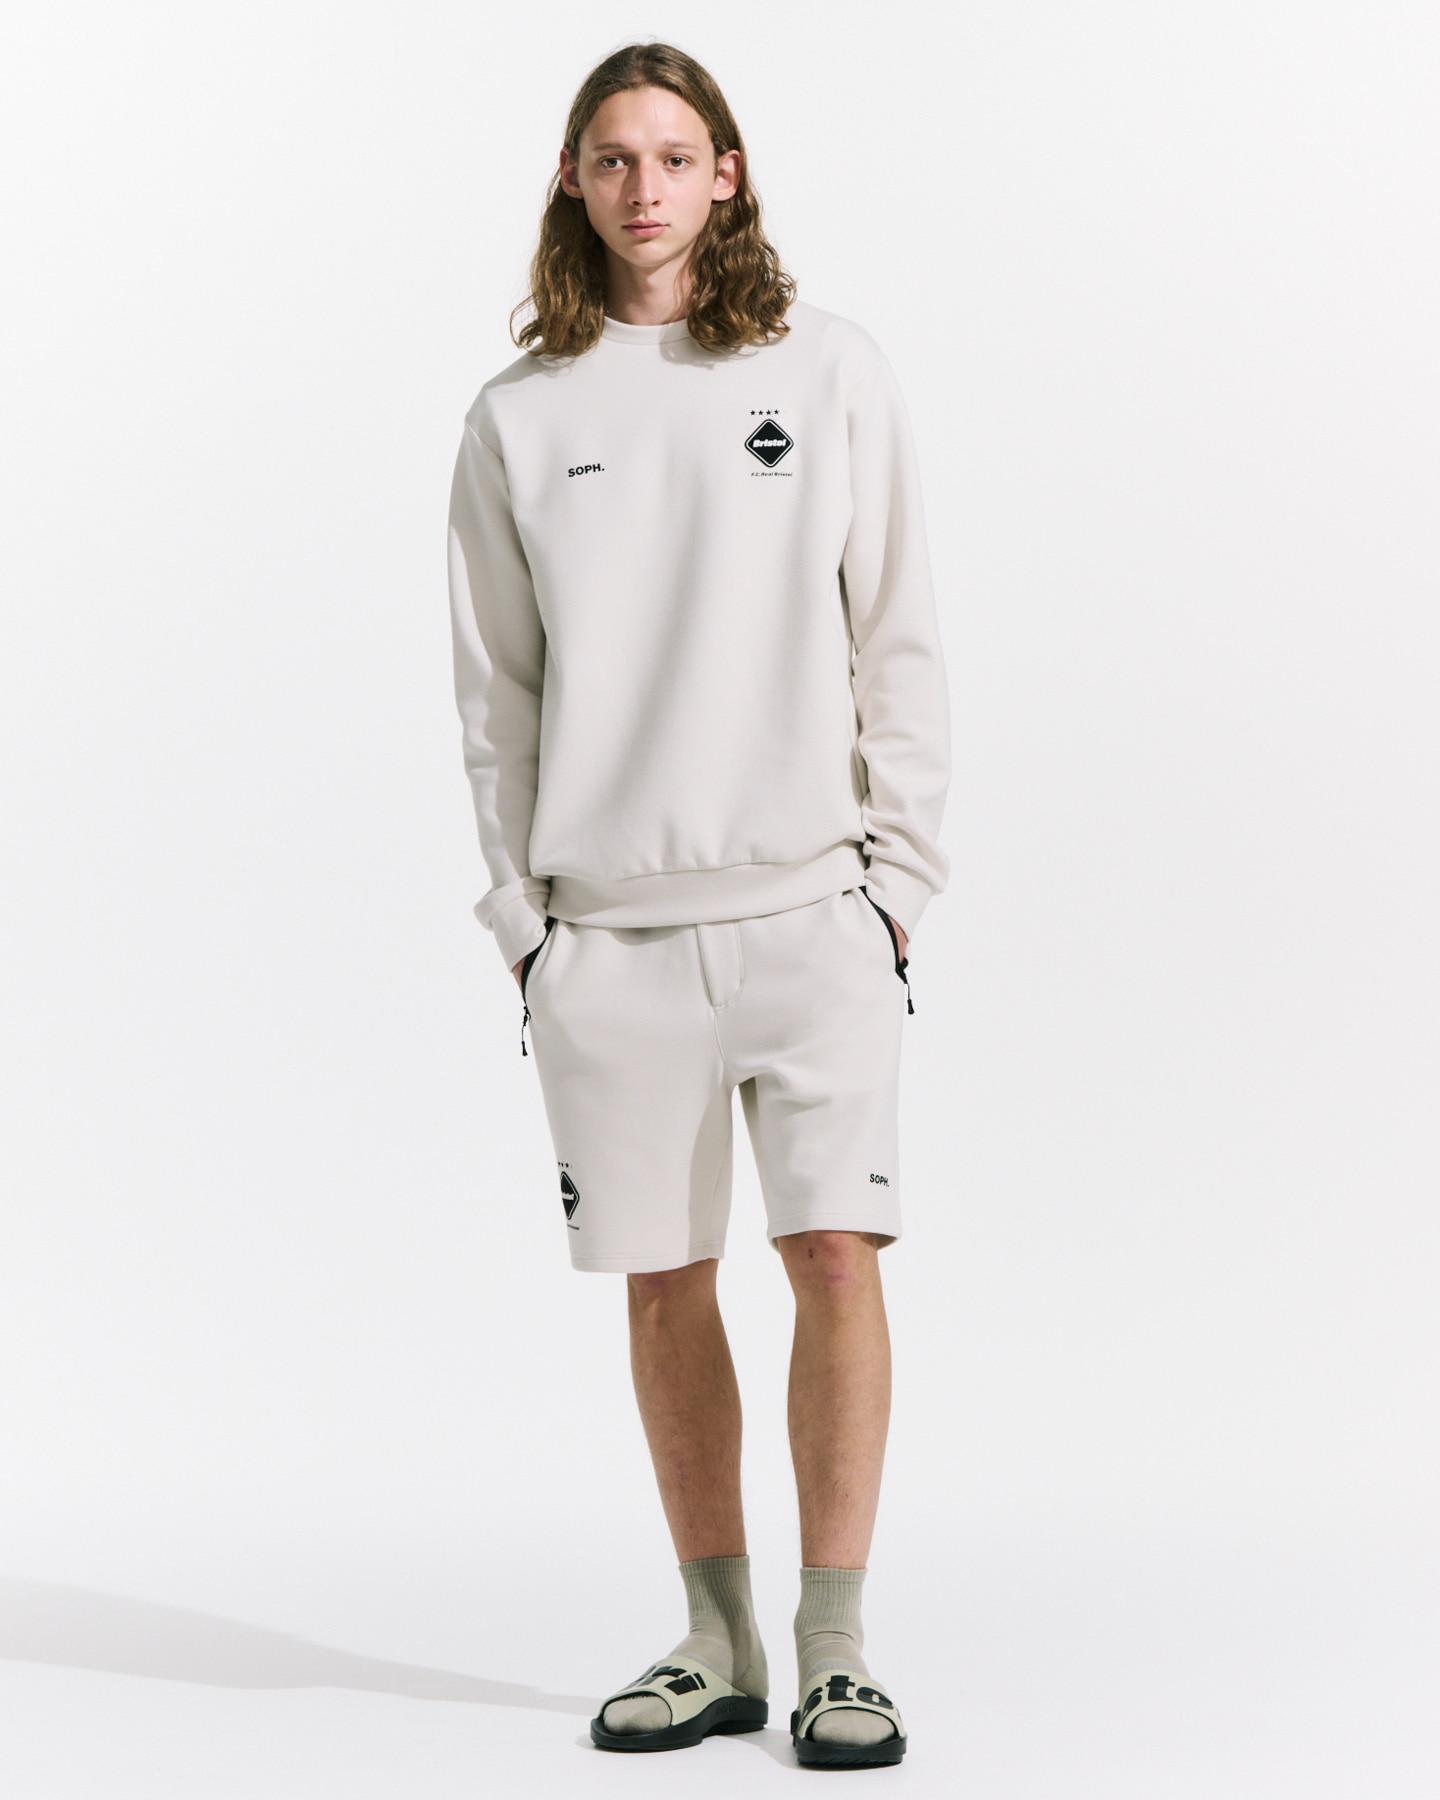 FCRB TECH SWEAT TRAINING HOODIE OFFWHITE-